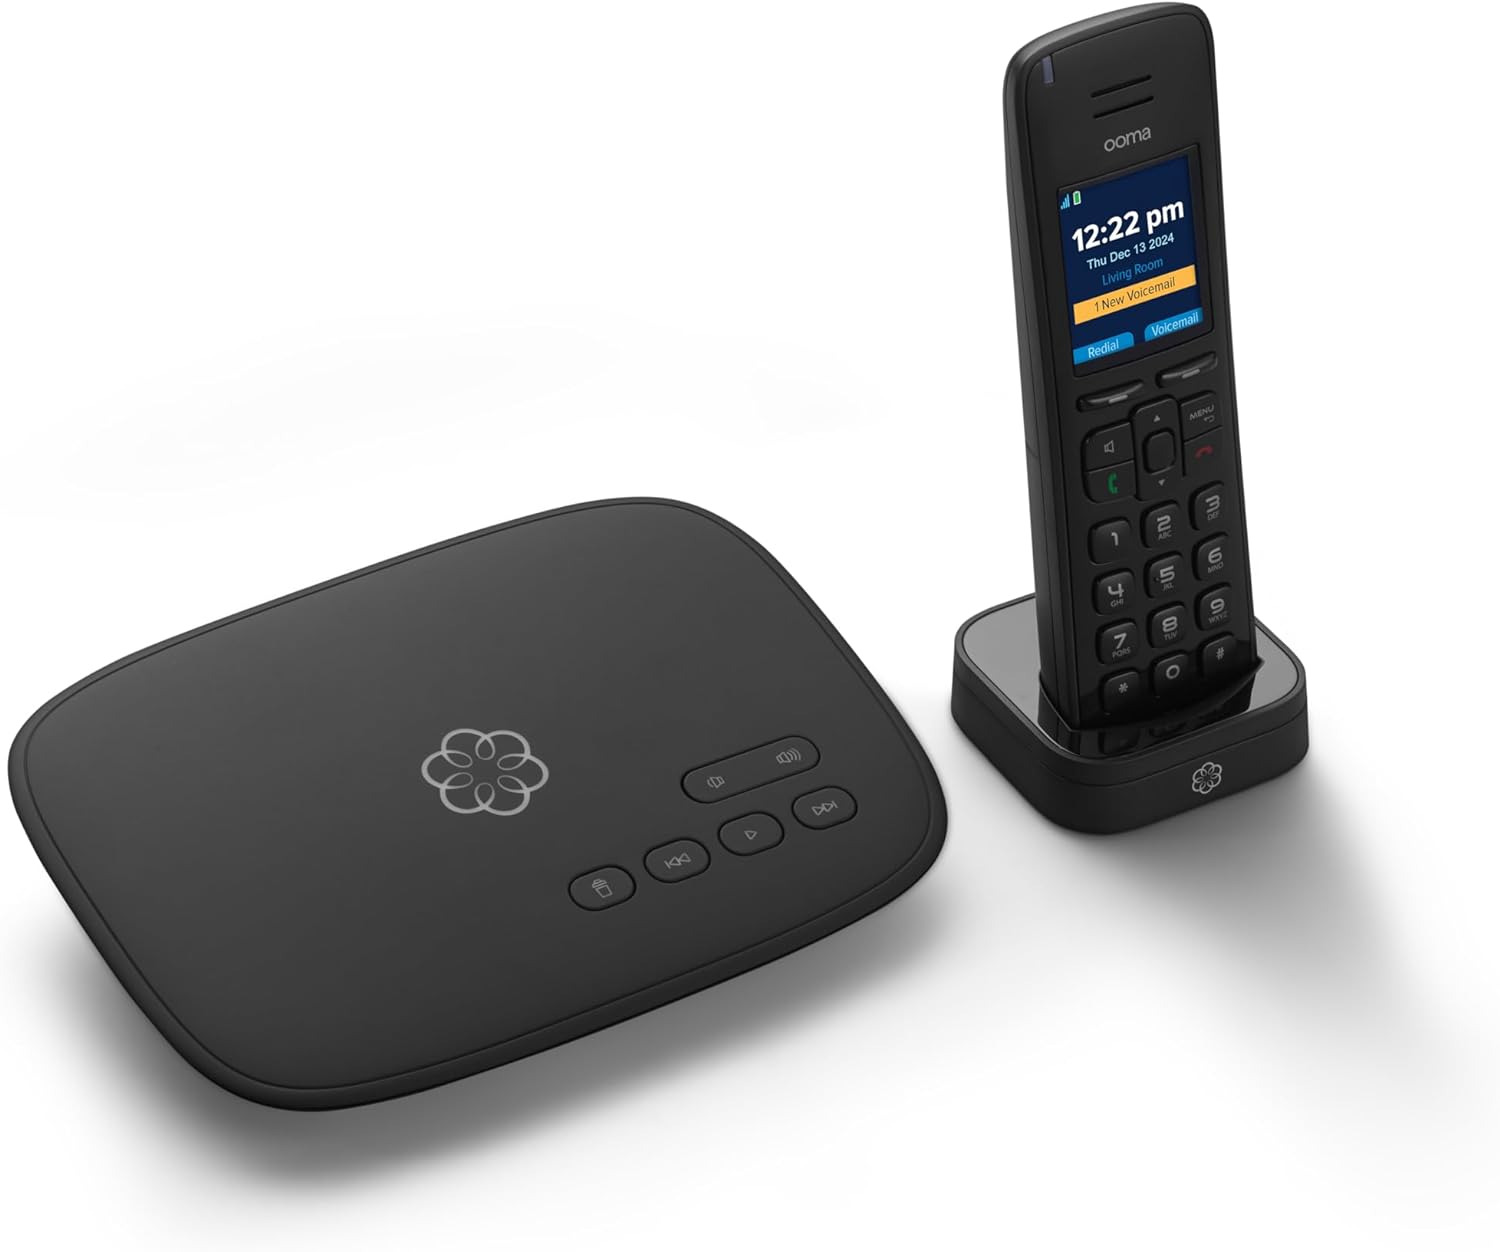 Telo Voip Free Internet Home Phone Service and HD3 Handset. Affordable Landline 